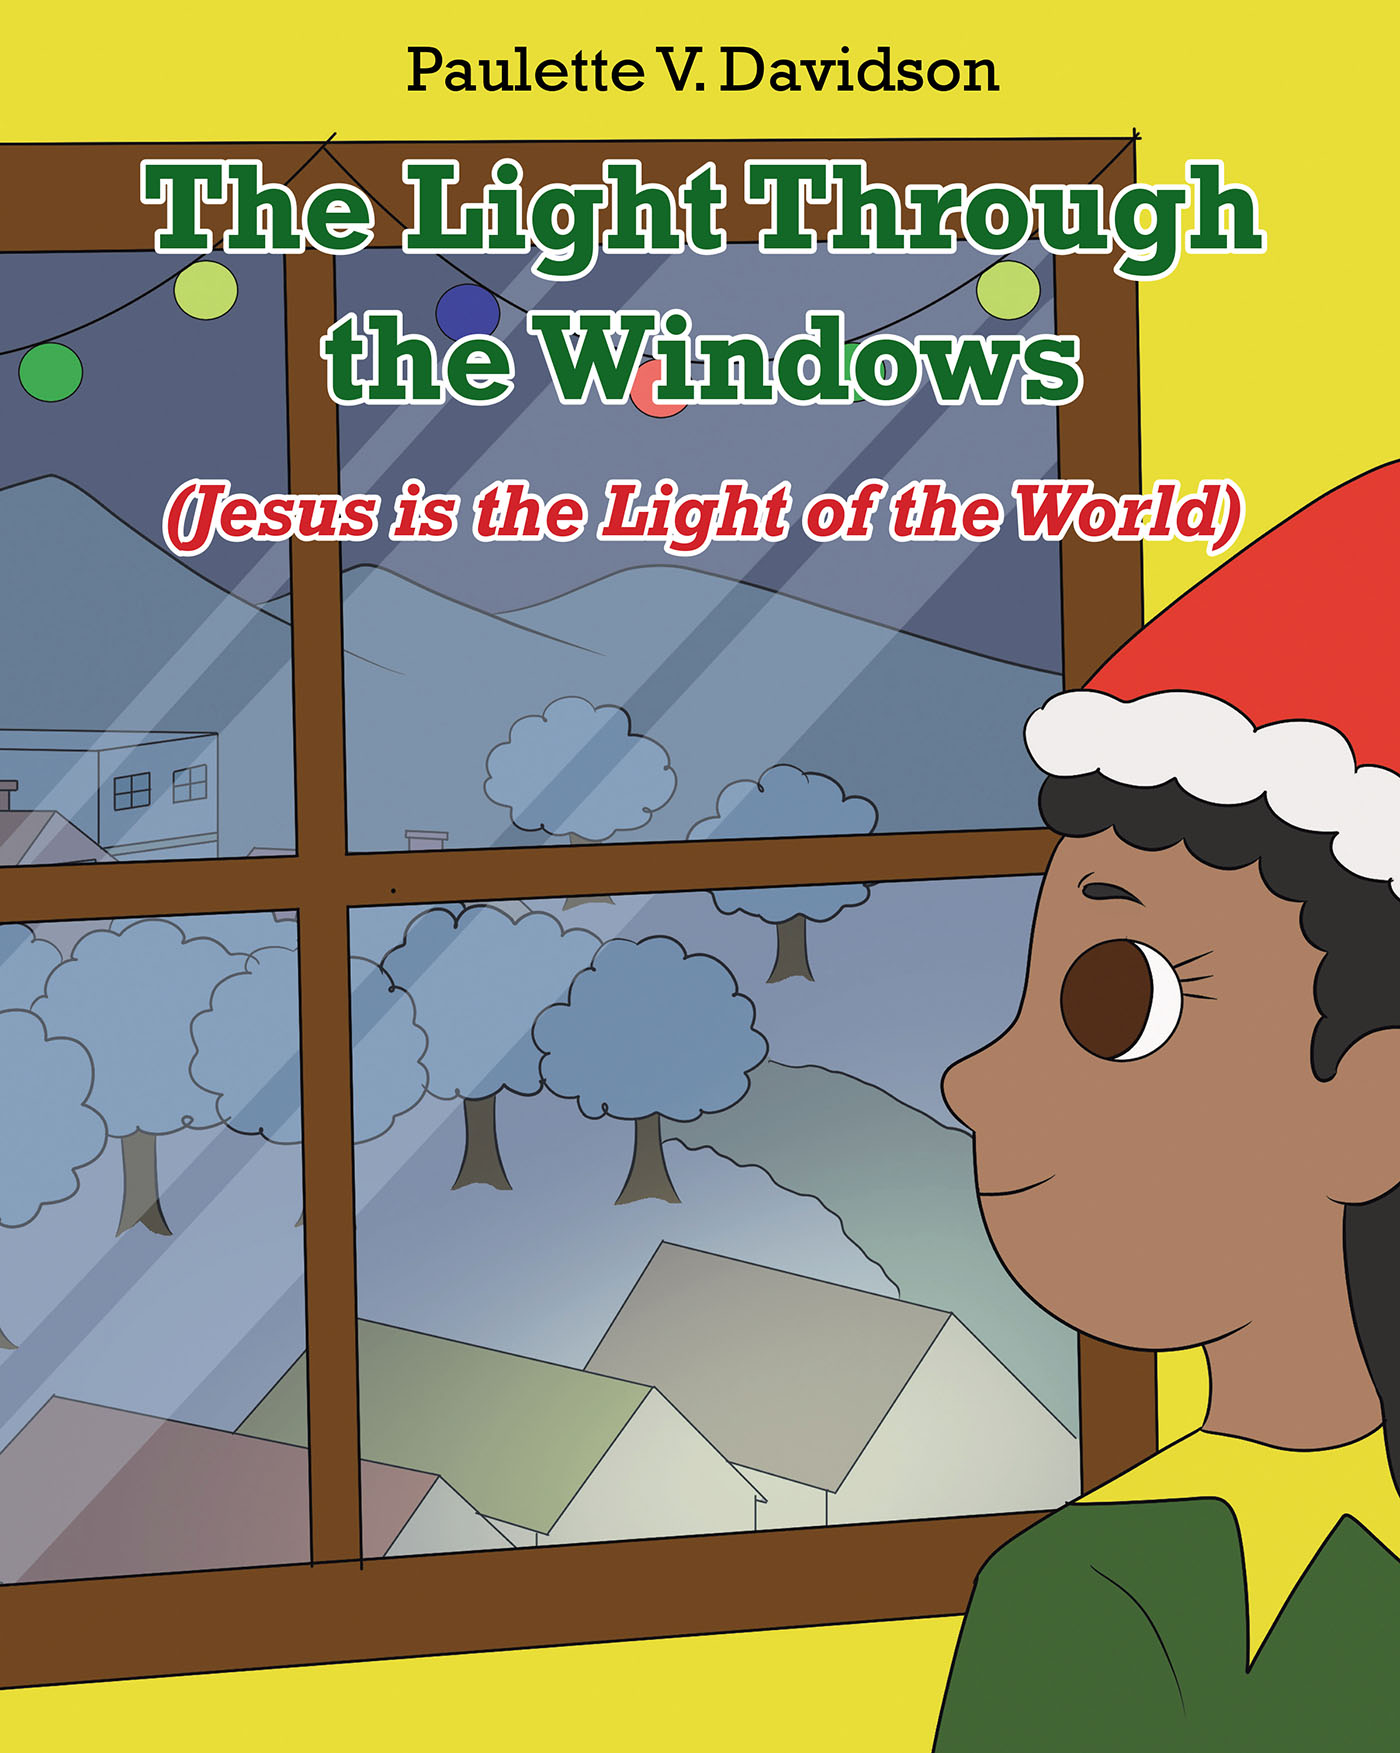 Paulette V. Davidson’s Newly Released “The Light Through the Windows (Jesus is the Light of the World)” is a Sweet Tale of Christmas Adventure